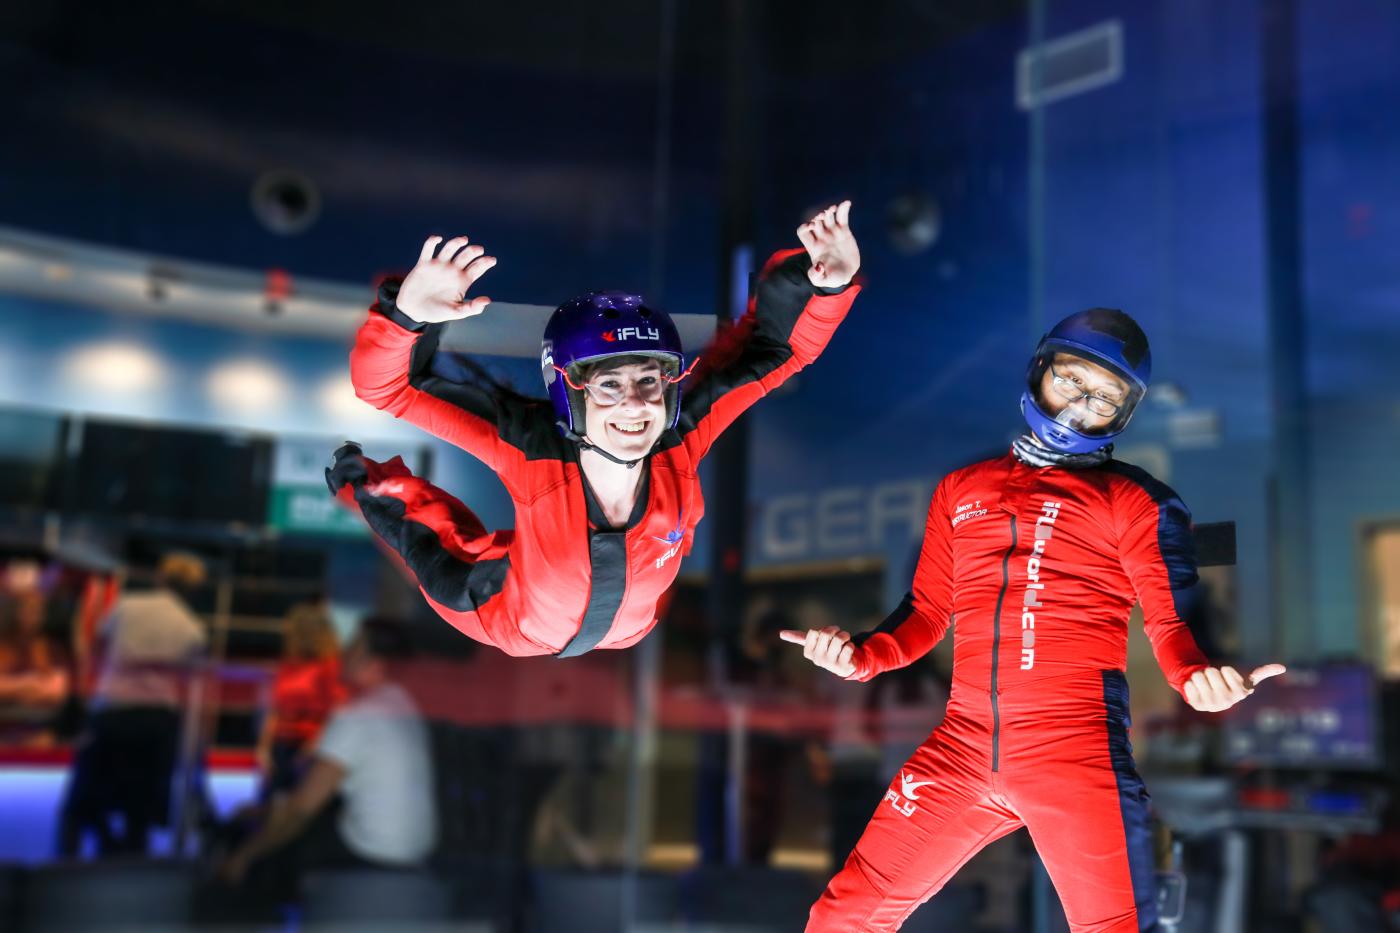 Lady flying next to instructor at iFly